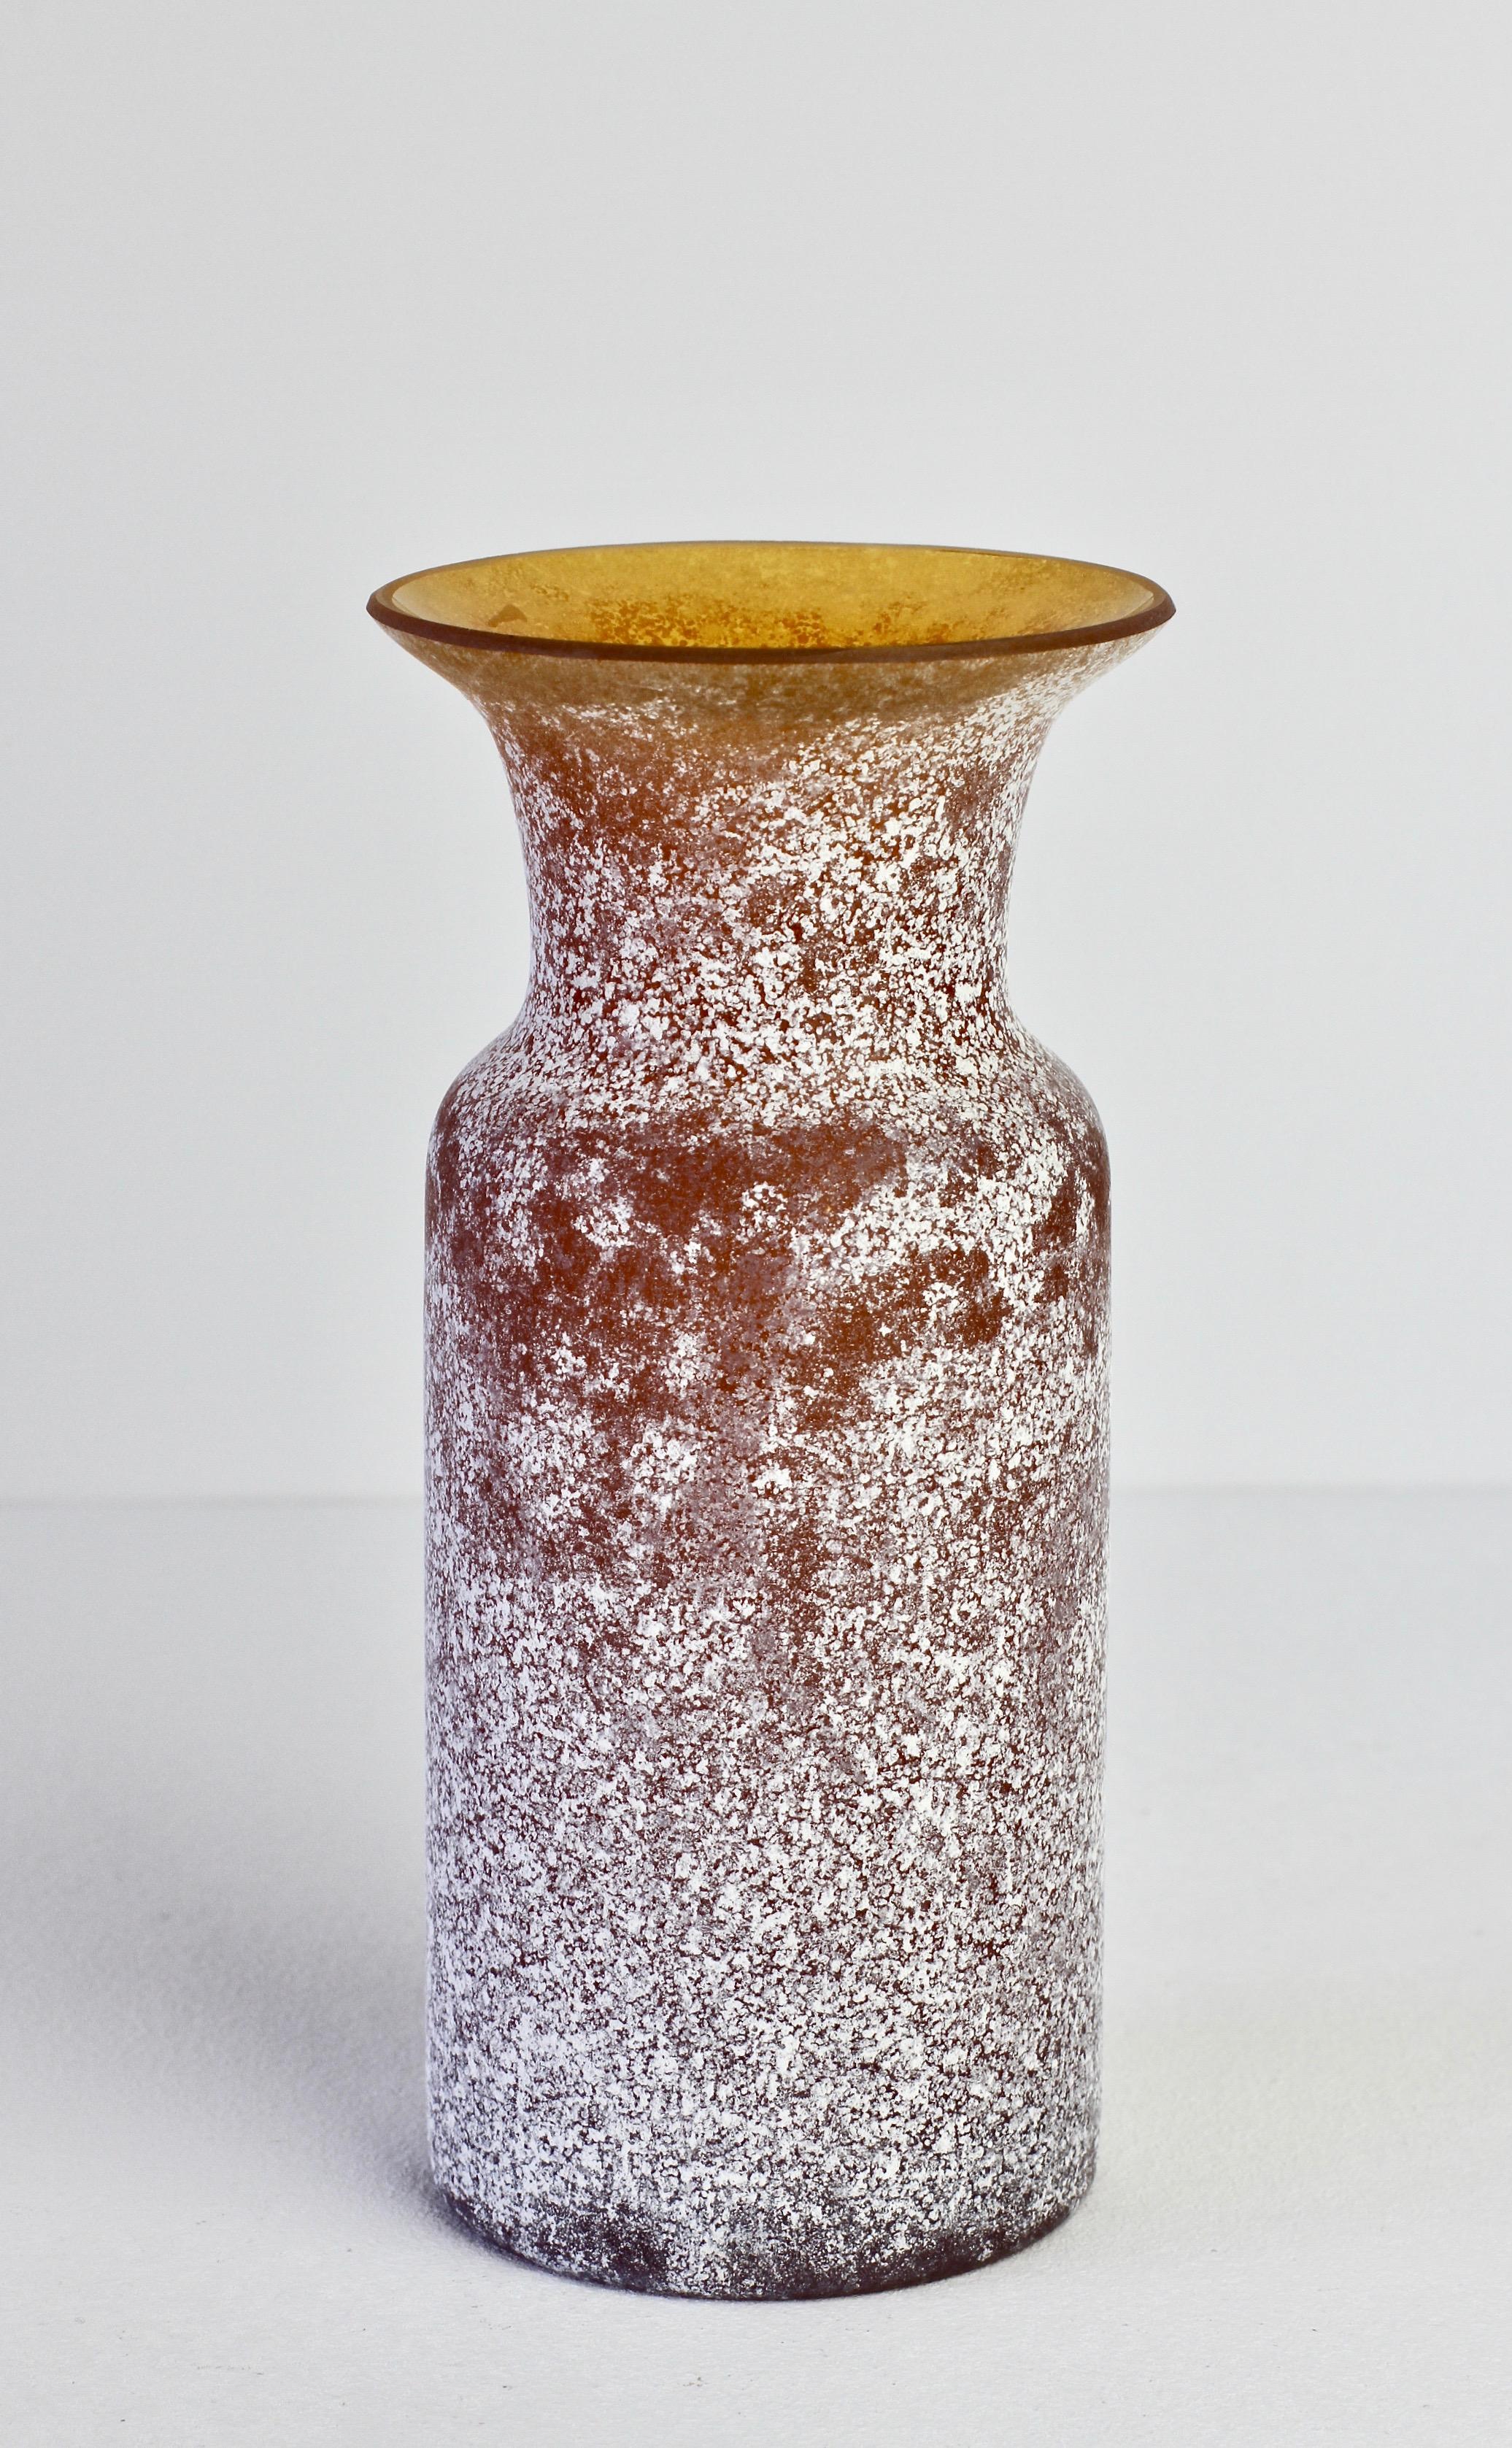 Beautiful 'a Scavo' brown colored / coloured glass vase or vessel by Seguso Vetri d'Arte Murano, Italy. Elegant in form and showing extraordinary craftsmanship with the use of the 'Scavo' technique to replicate to look and feel of ancient Roman